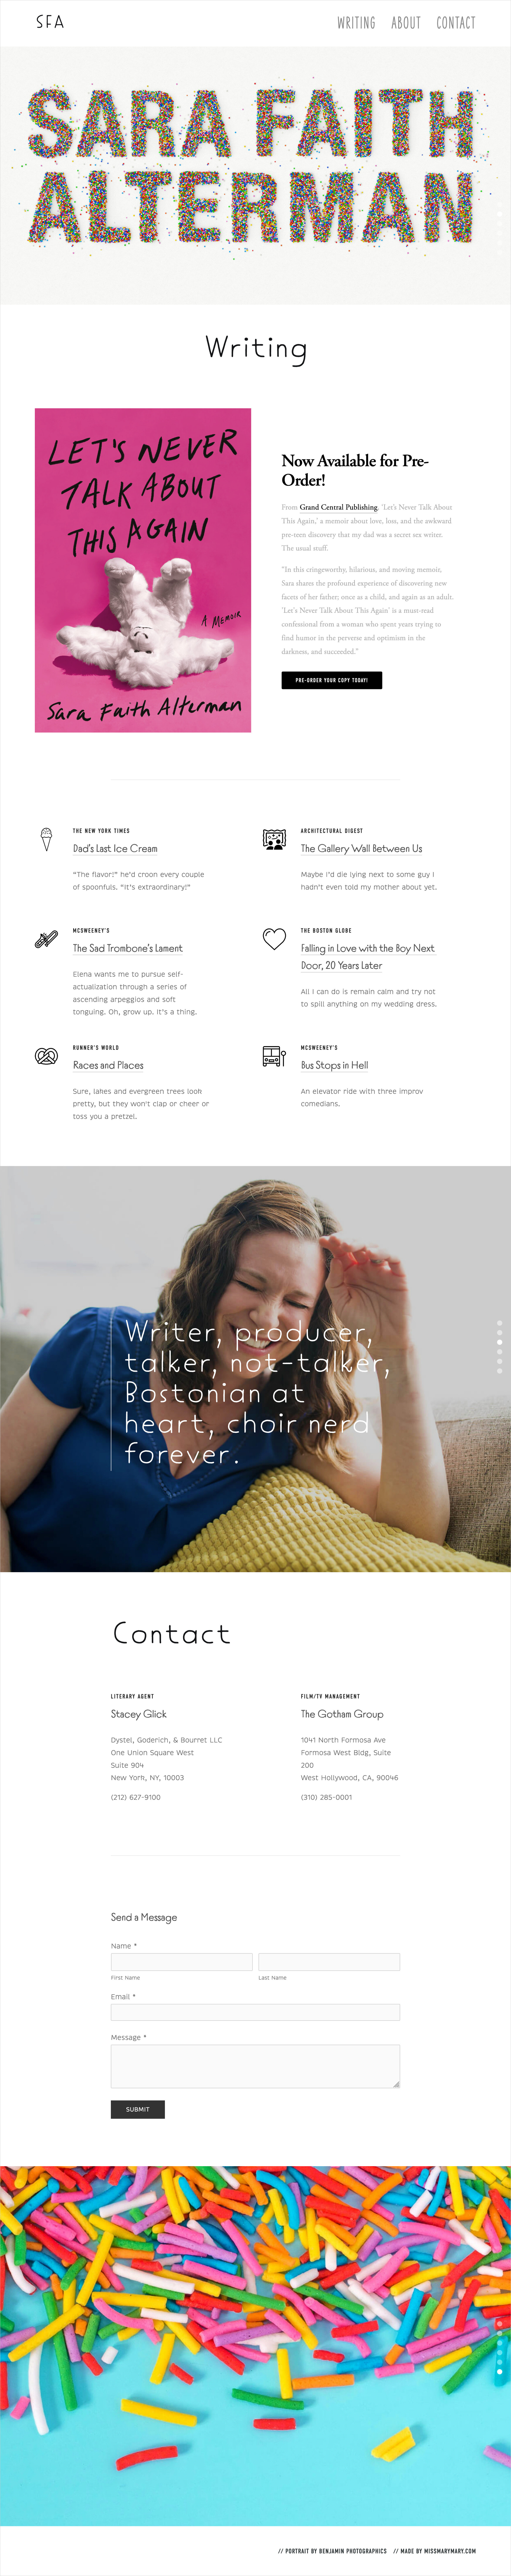  Website designed and built for writer Sara Faith Alterman. Built on the Squarespace platform to revamp her web presence and promote her new book, “Let’s Never Talk About This Again.” 